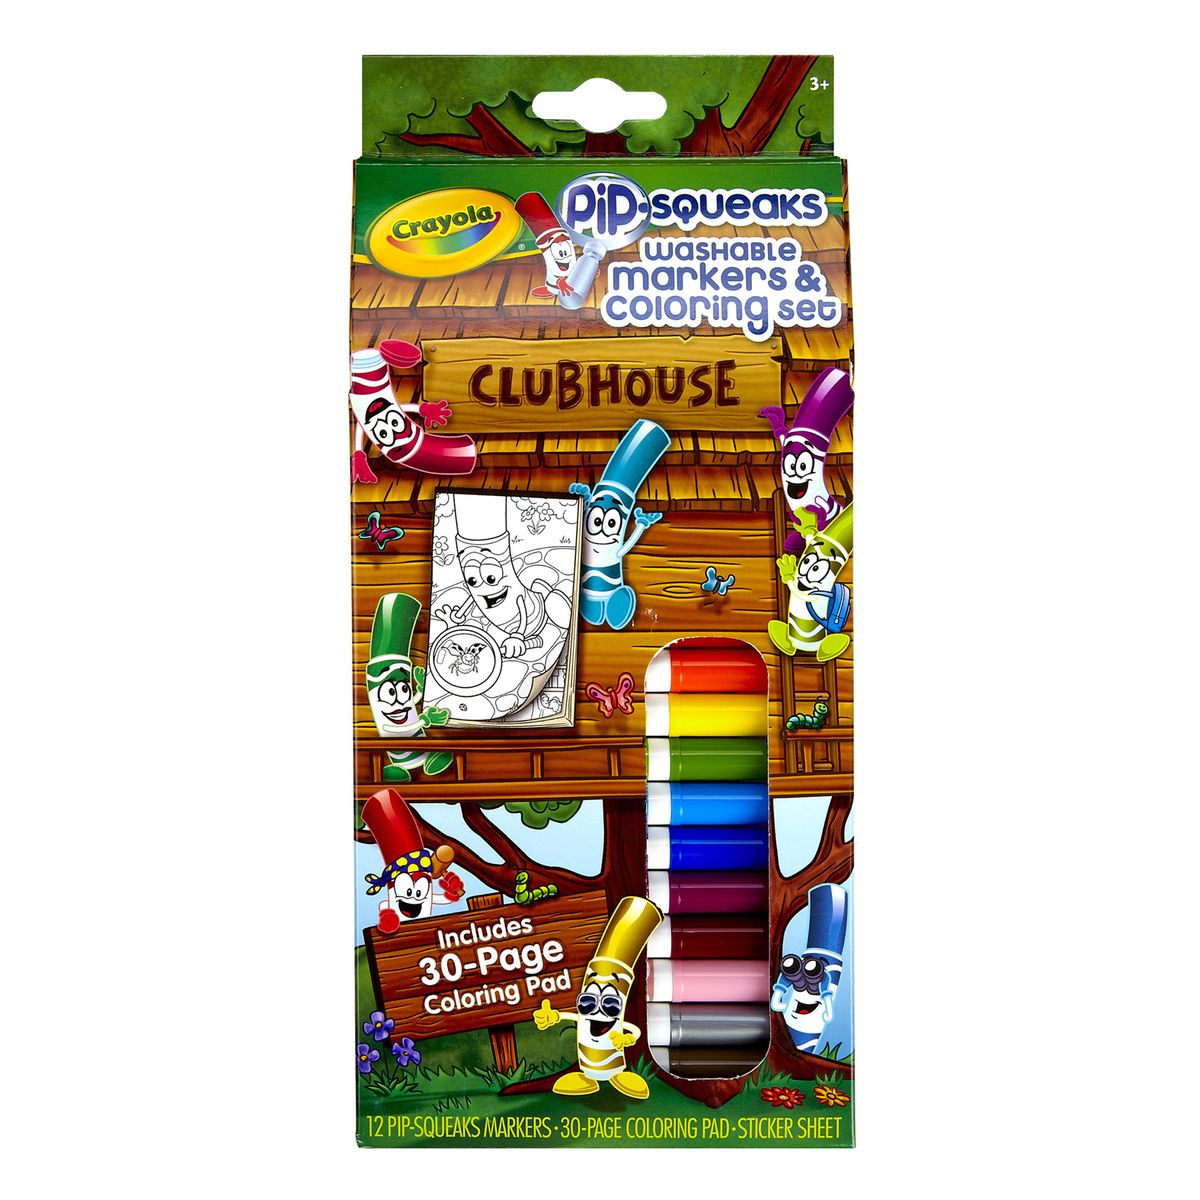 Crayola Pipsqueak Marker Colouring Set | Buy Online in South Africa